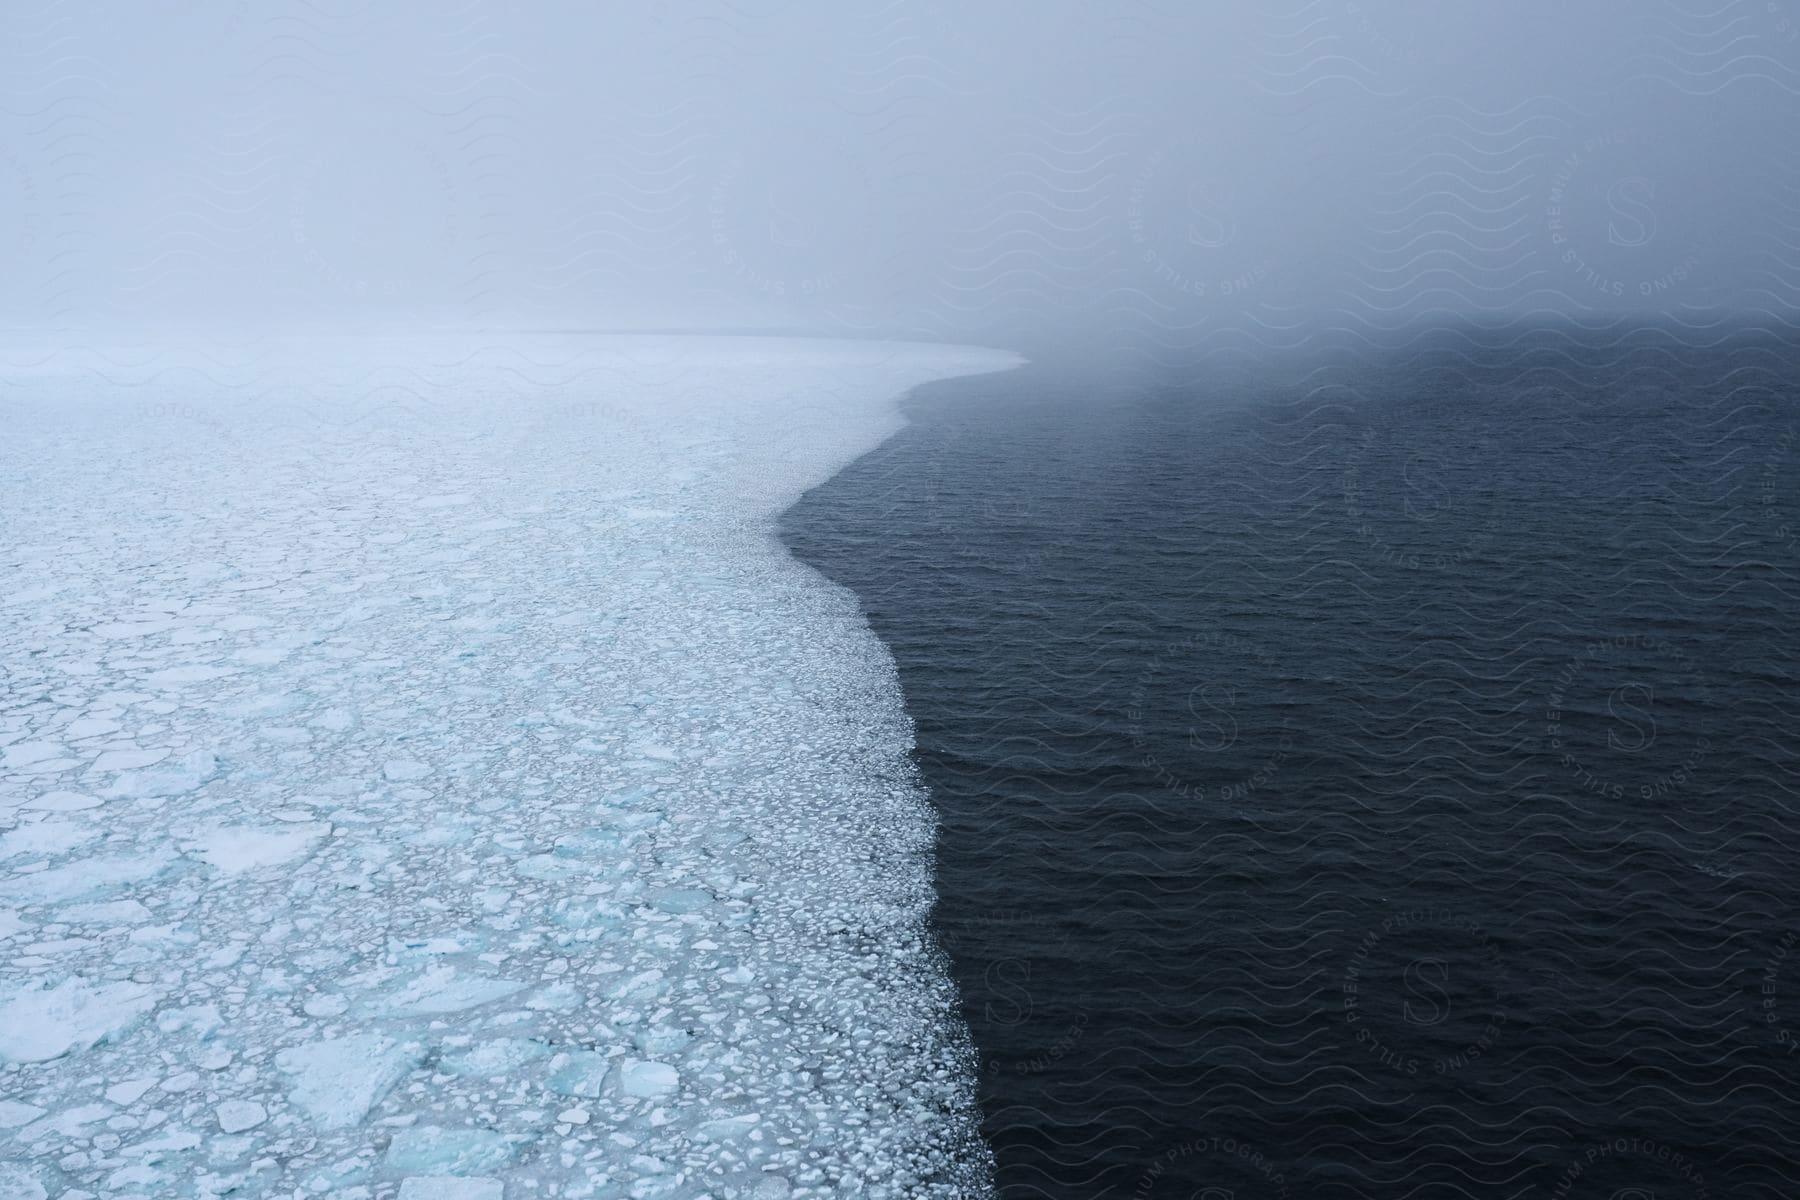 Ice floes gathered together in the open ocean.